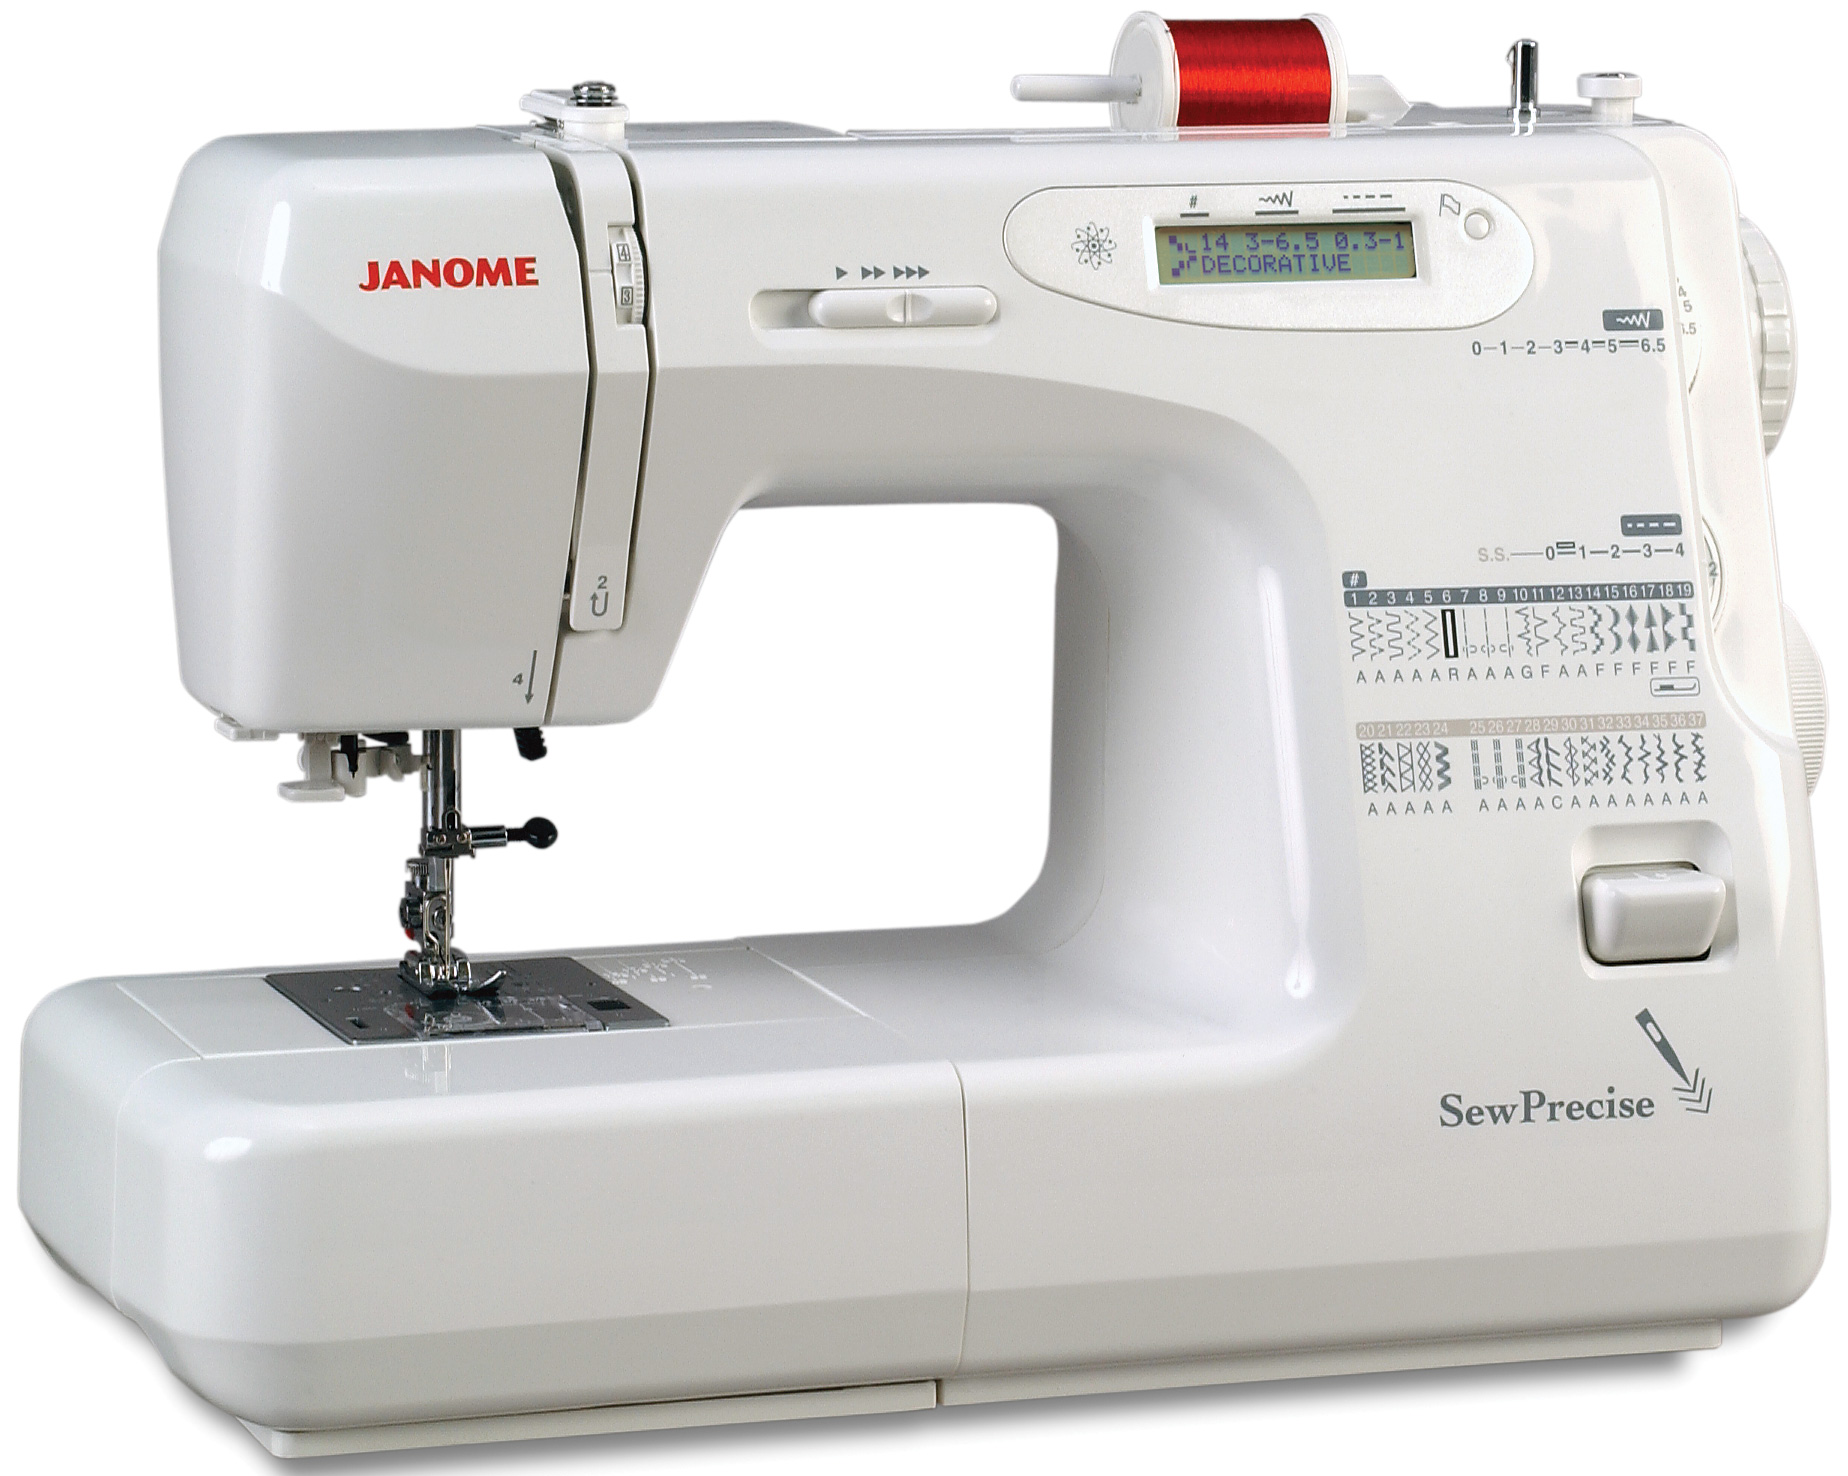 Download this Janome Sew Precise... picture